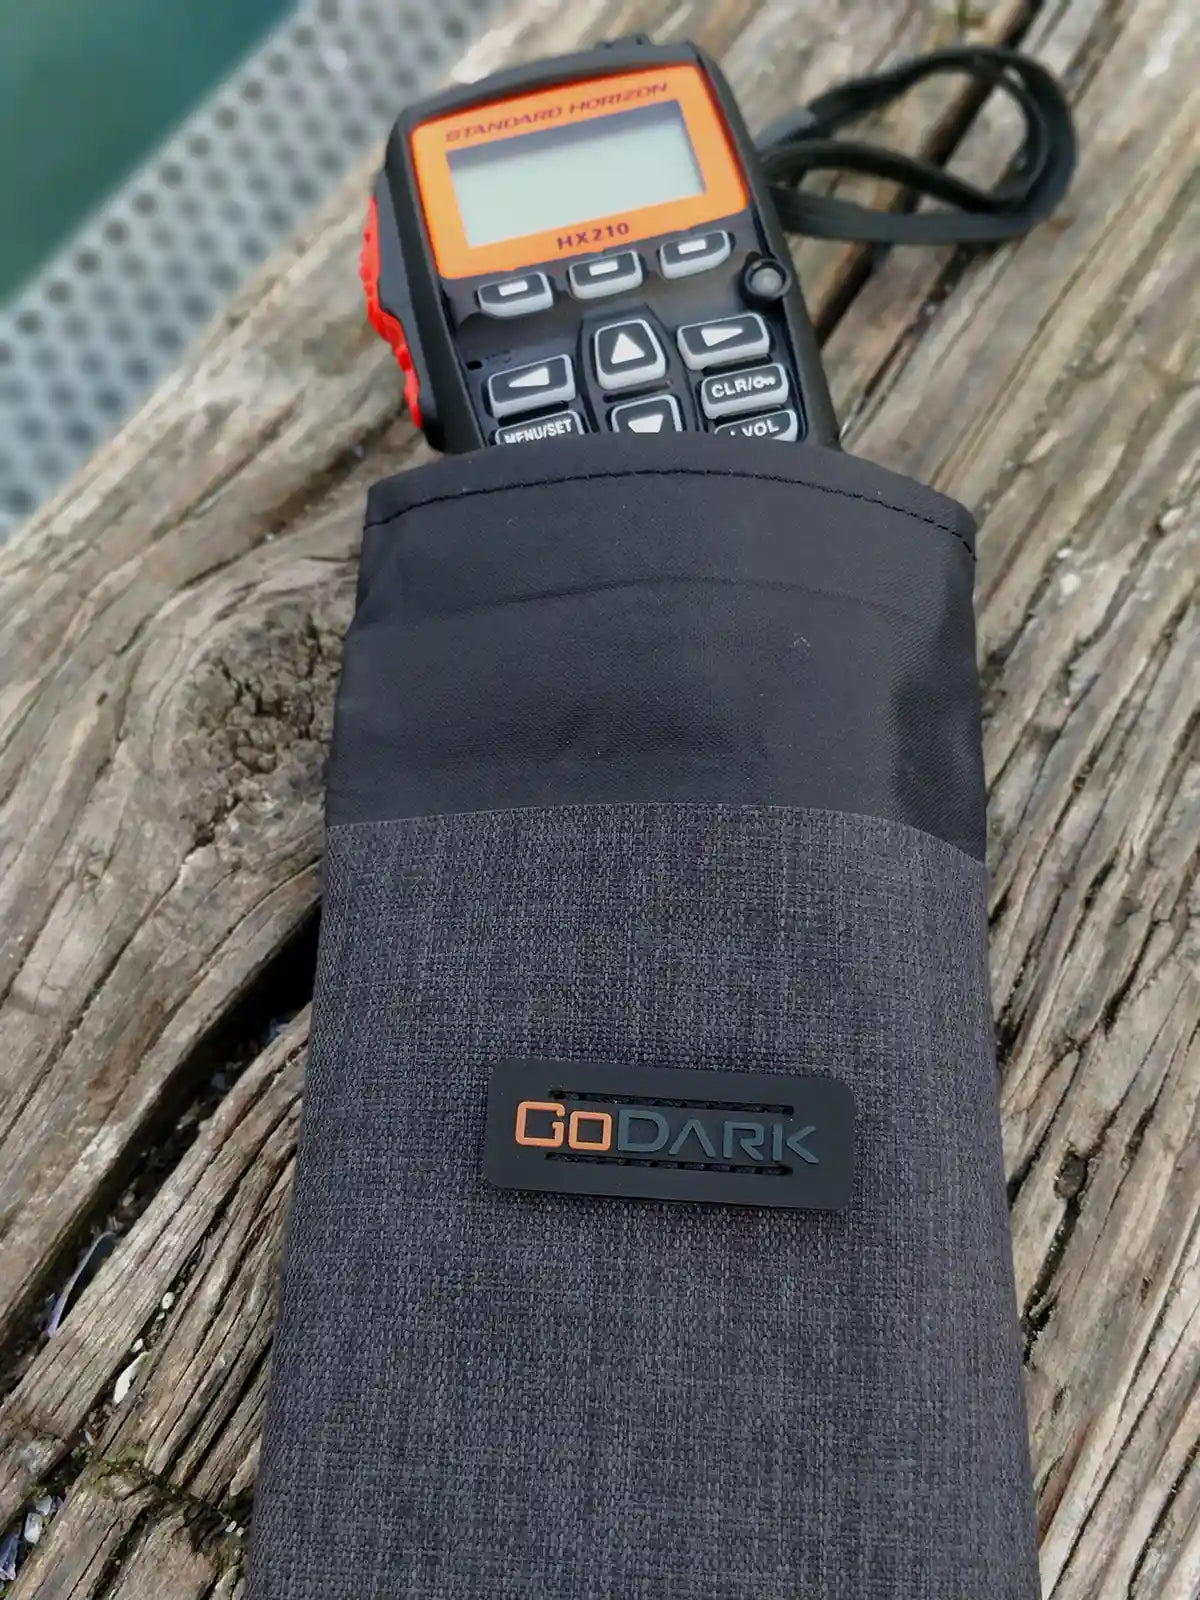 Phone bag with a radio in it